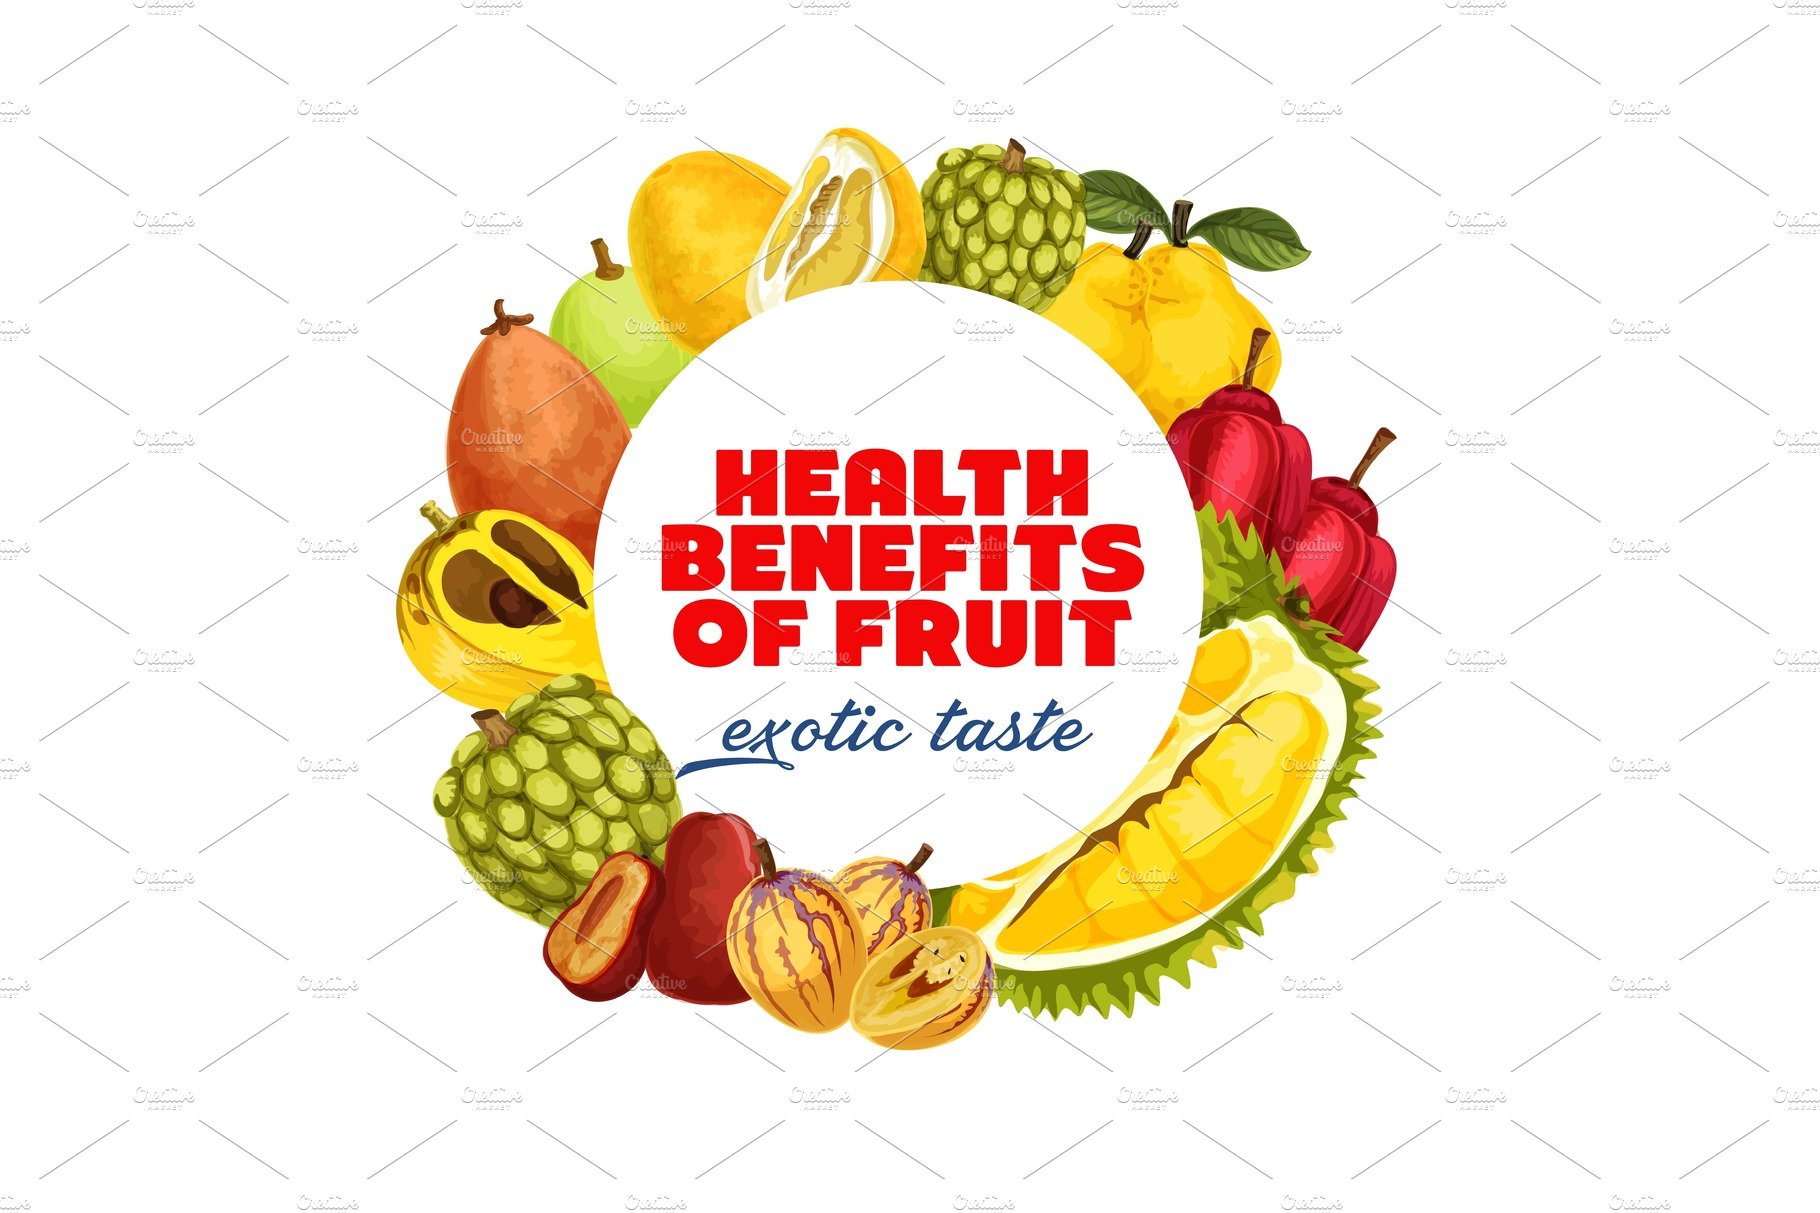 Exotic tropic fruits, healthy food cover image.